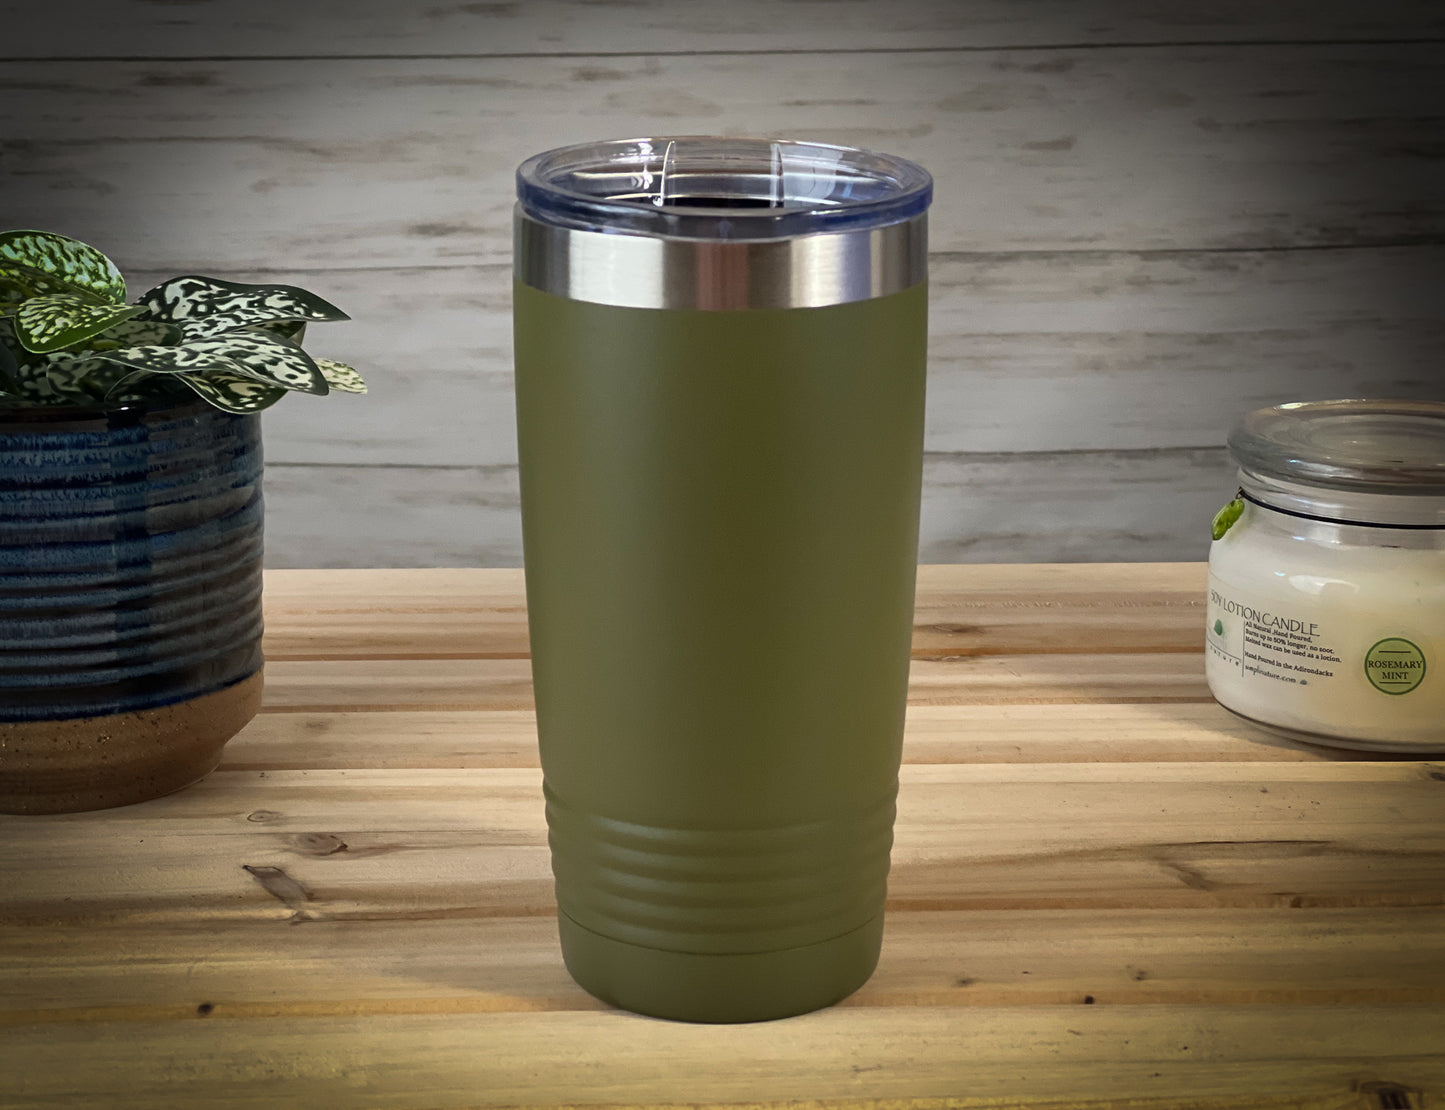 Life is Better on the Fulton Chain  20 oz Insulated Travel Mug